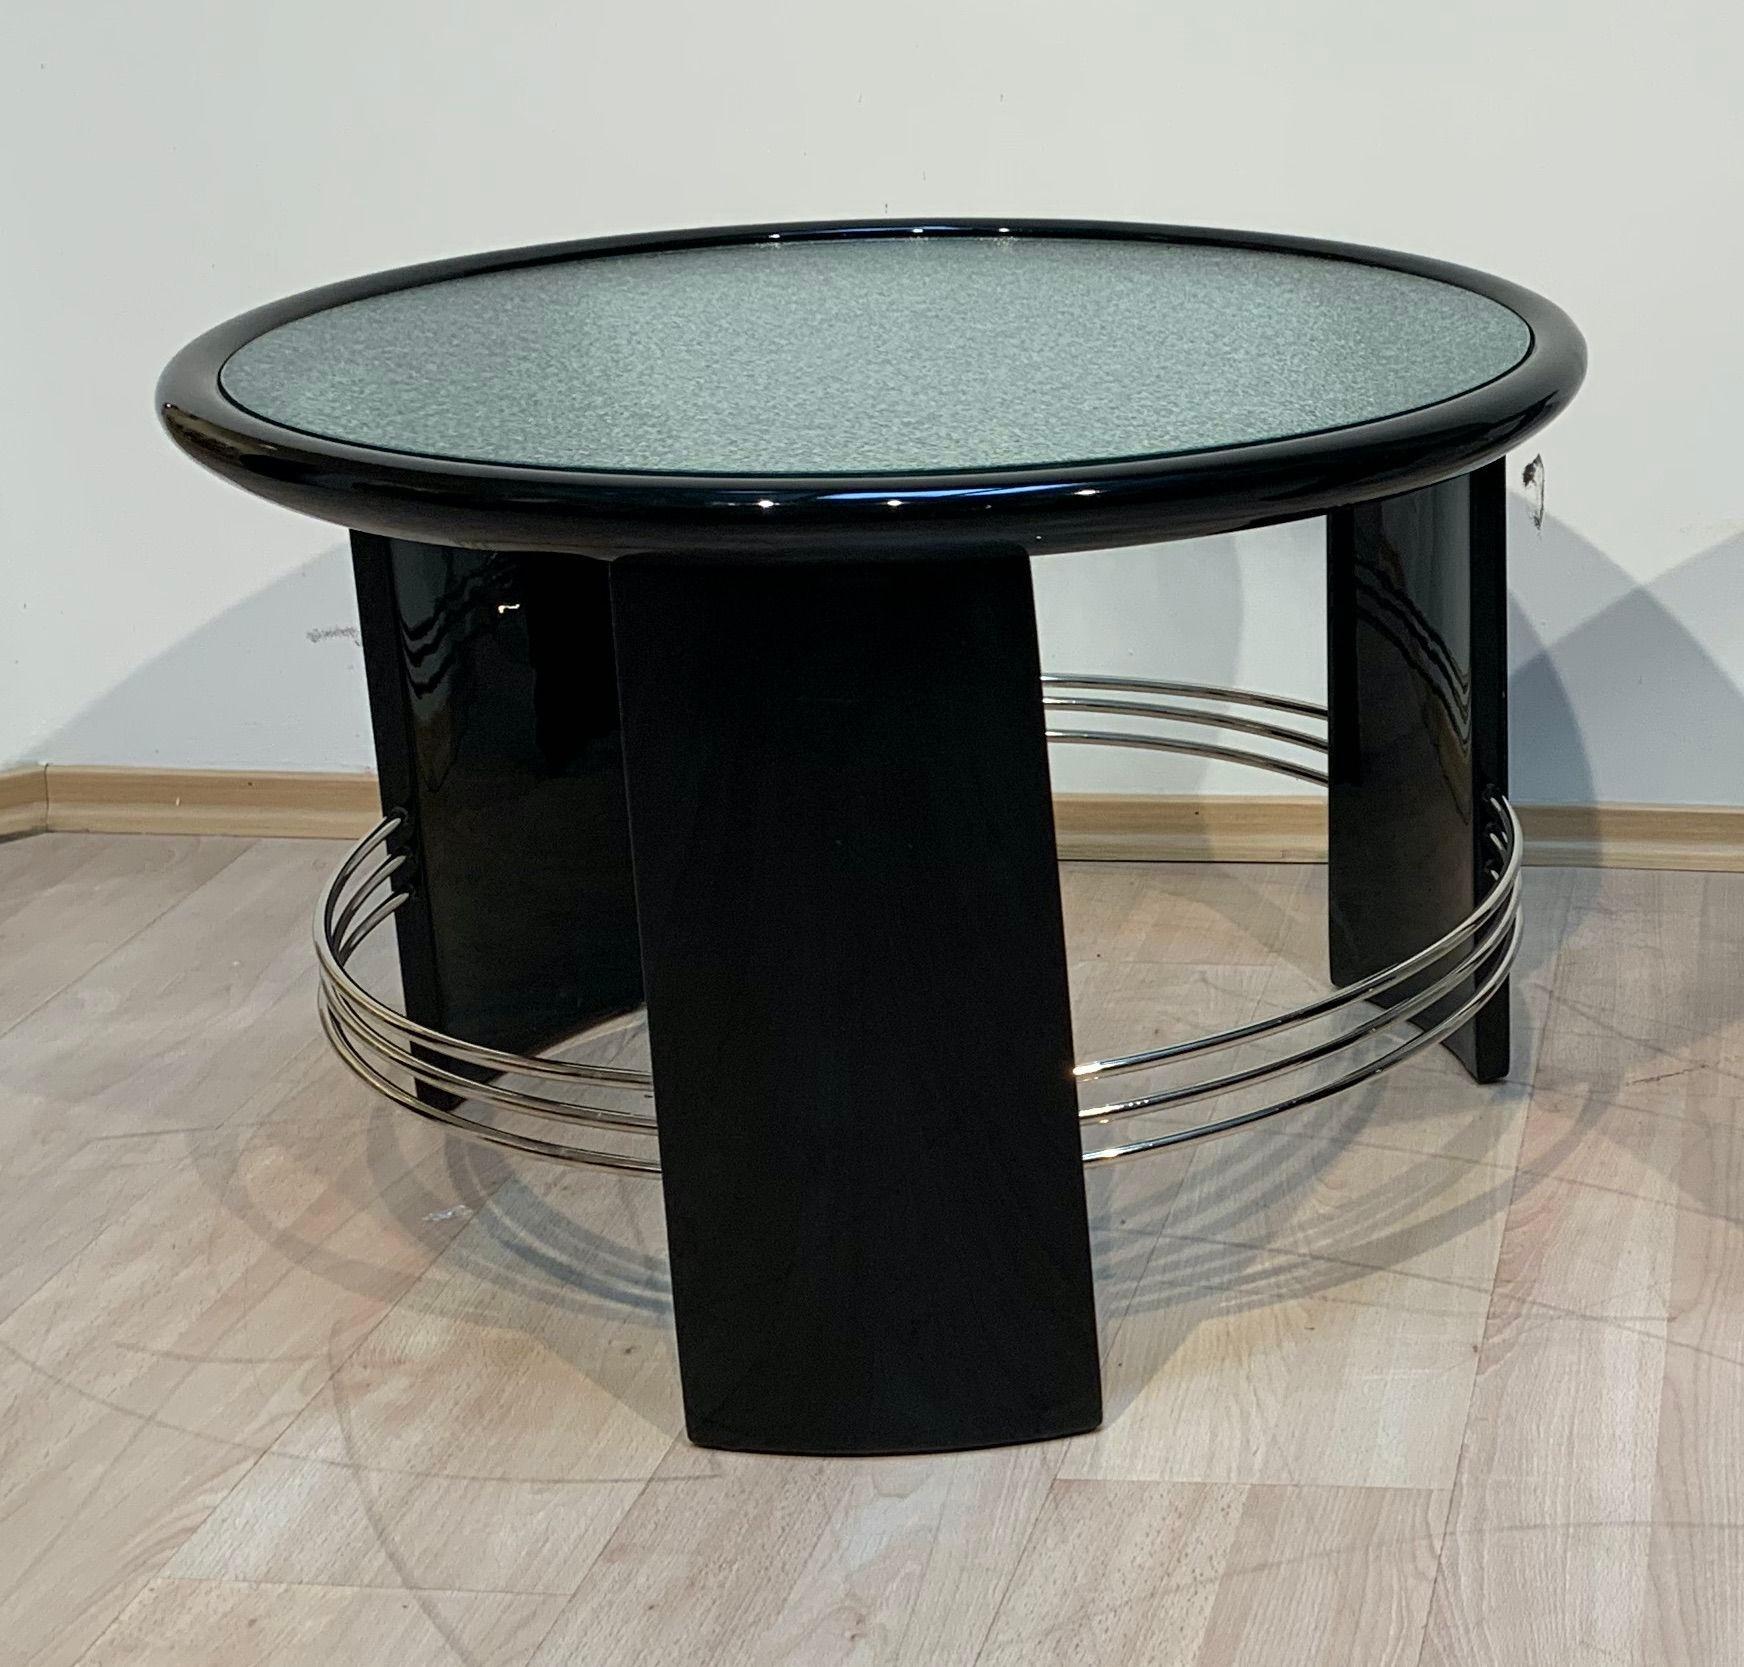 Mid-20th Century Art Deco Round Coffee Table, Black Lacquer, Chrome, Glass, France circa 1930 For Sale